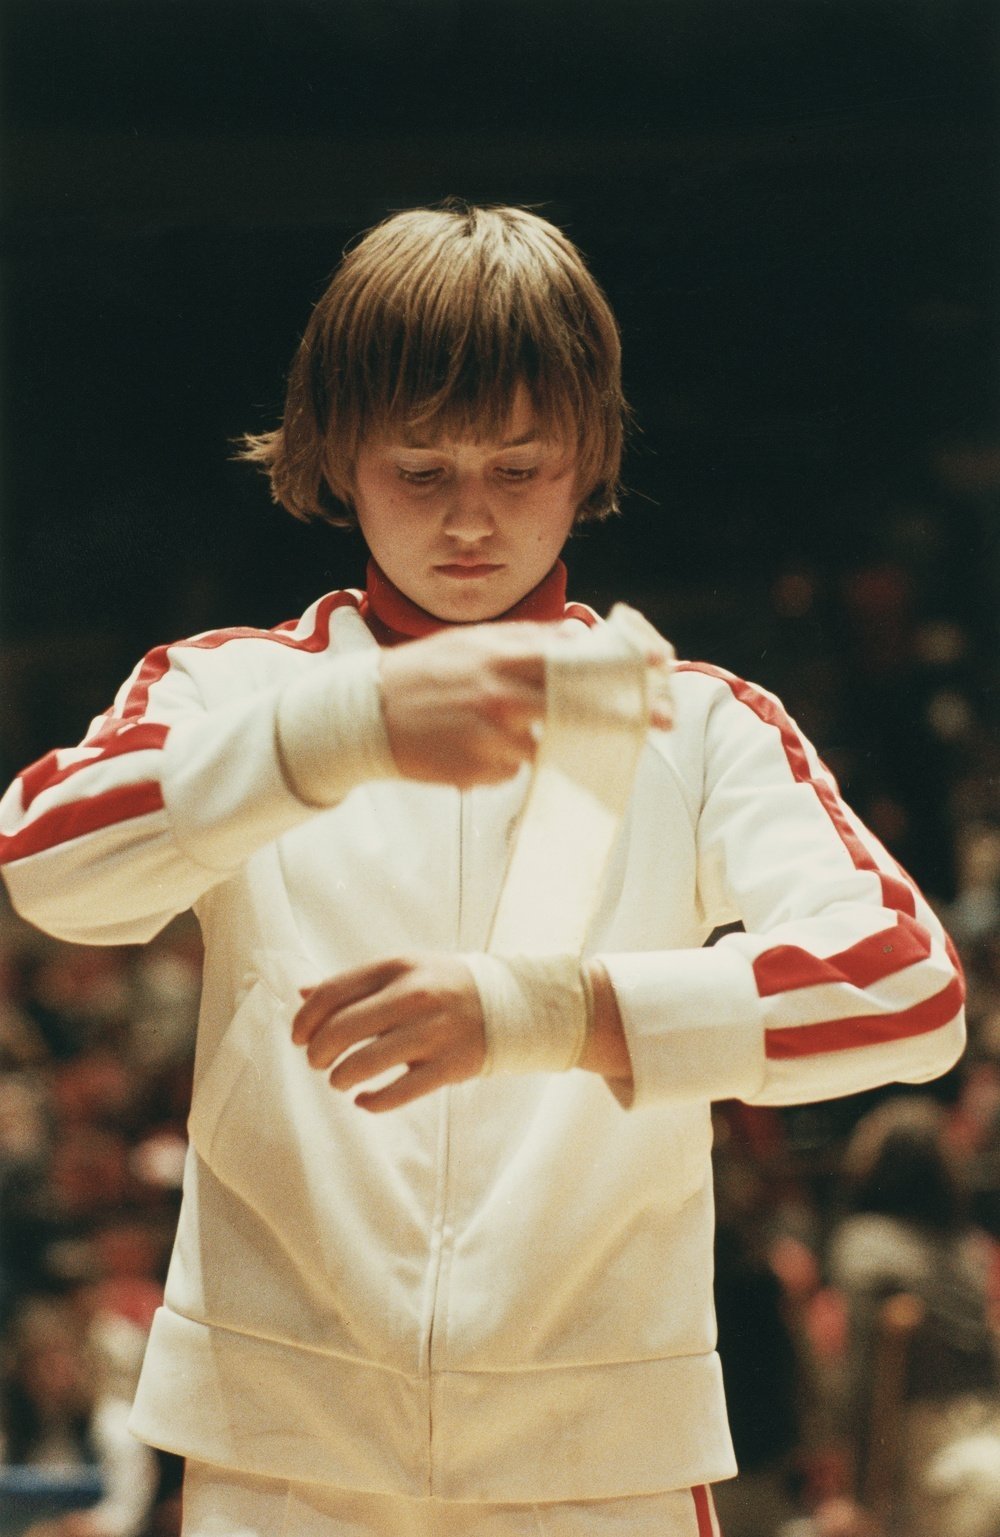 Romanian gymnast Nadia Comaneci wraps a bandage around her wrist prior to competition in the 1979 World Artistic Gymnastics Championships, Fort Worth, Texas, December 1979. (Photo by Robert Riger/Getty Images)